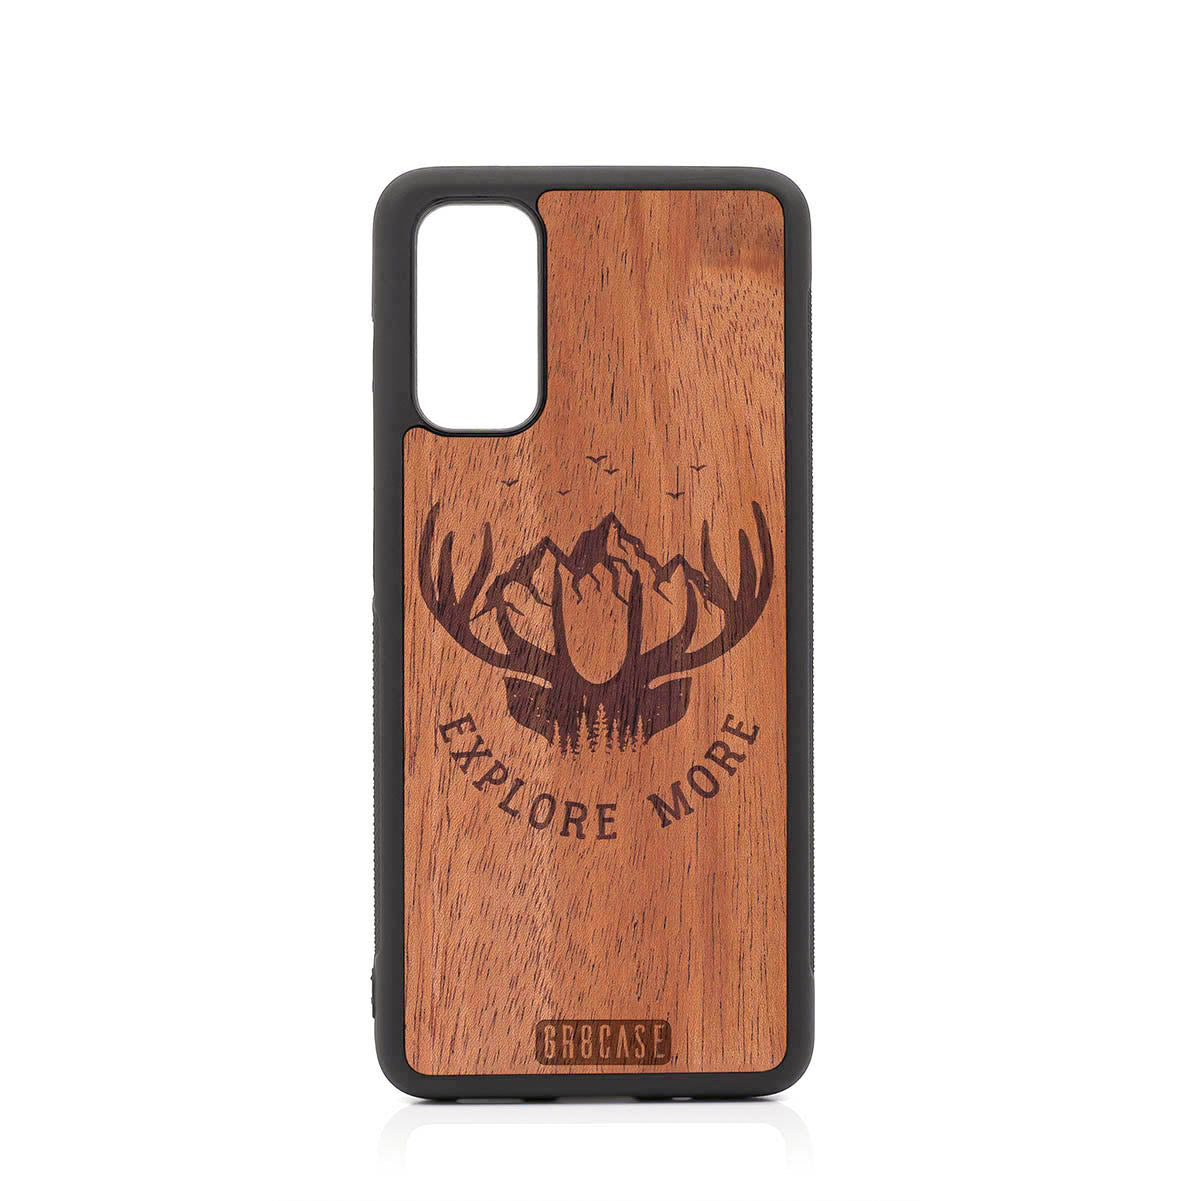 Explore More (Forest, Mountains & Antlers) Design Wood Case For Samsung Galaxy S20 Ultra by GR8CASE